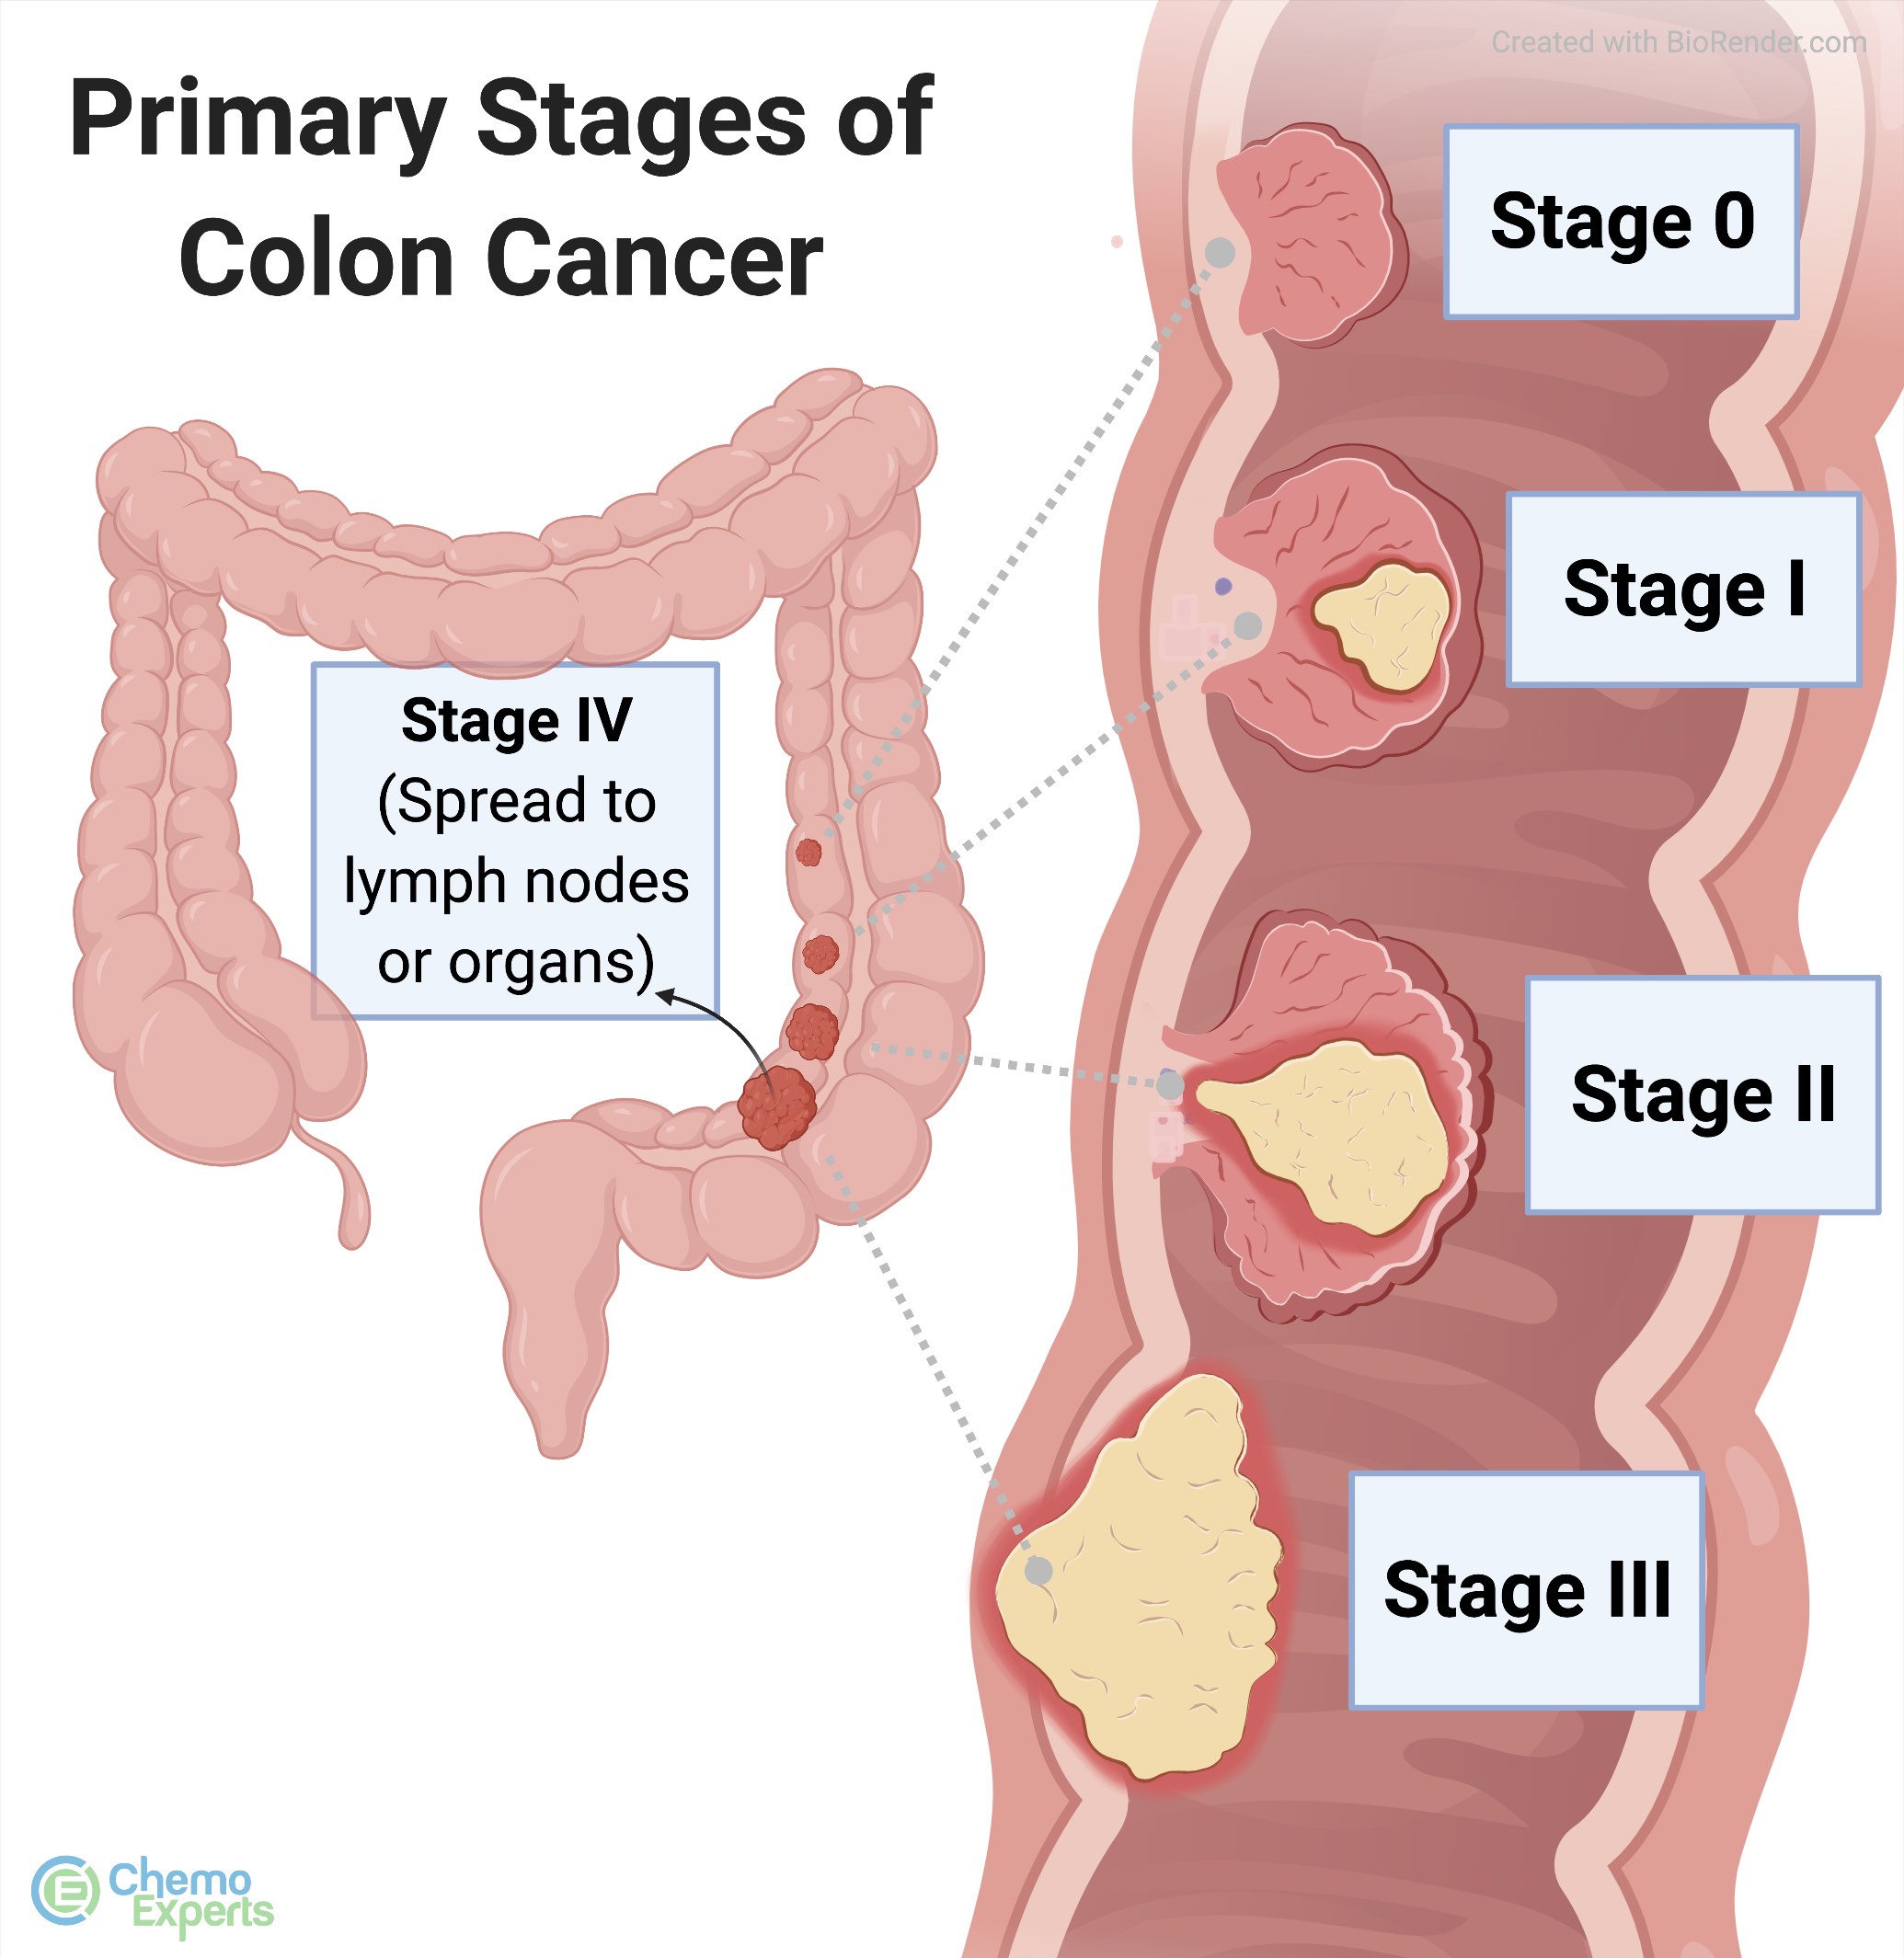 Primary-stages-of-colon-cancer-0-1-2-3-4-image.jpg